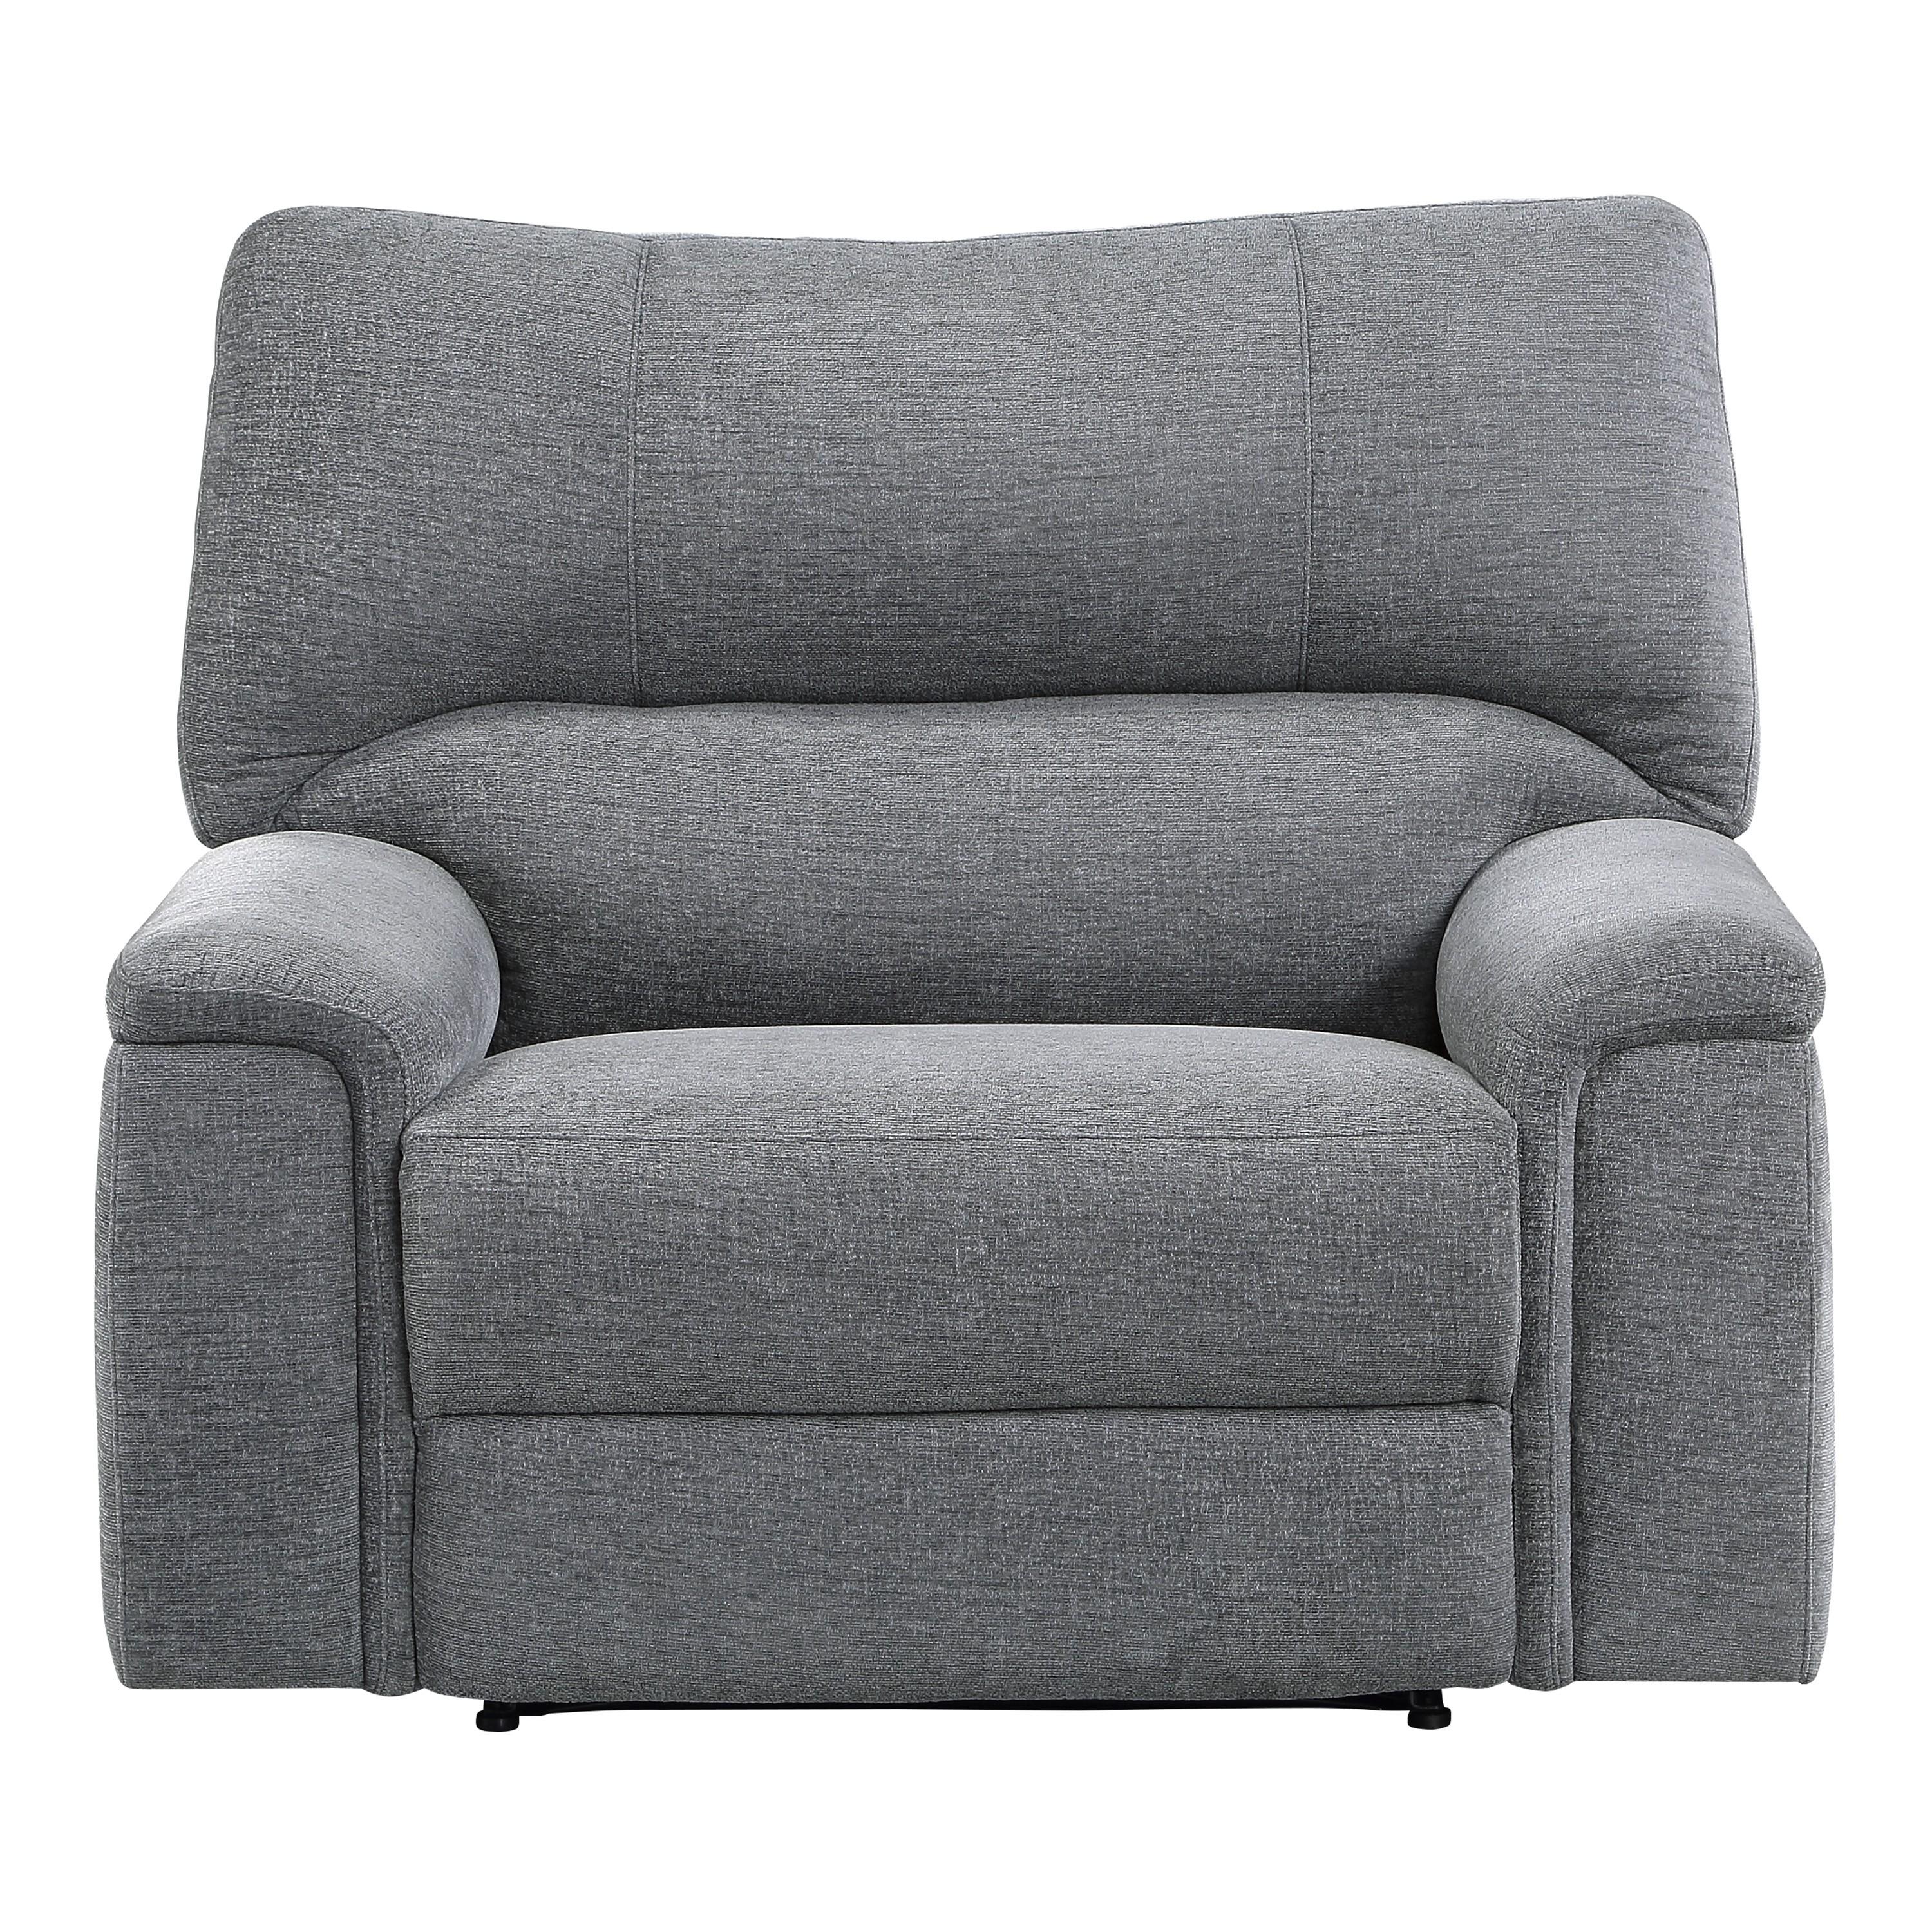 Transitional Power Reclining Chair 9413CC-1PWH Dickinson 9413CC-1PWH in Charcoal Chenille